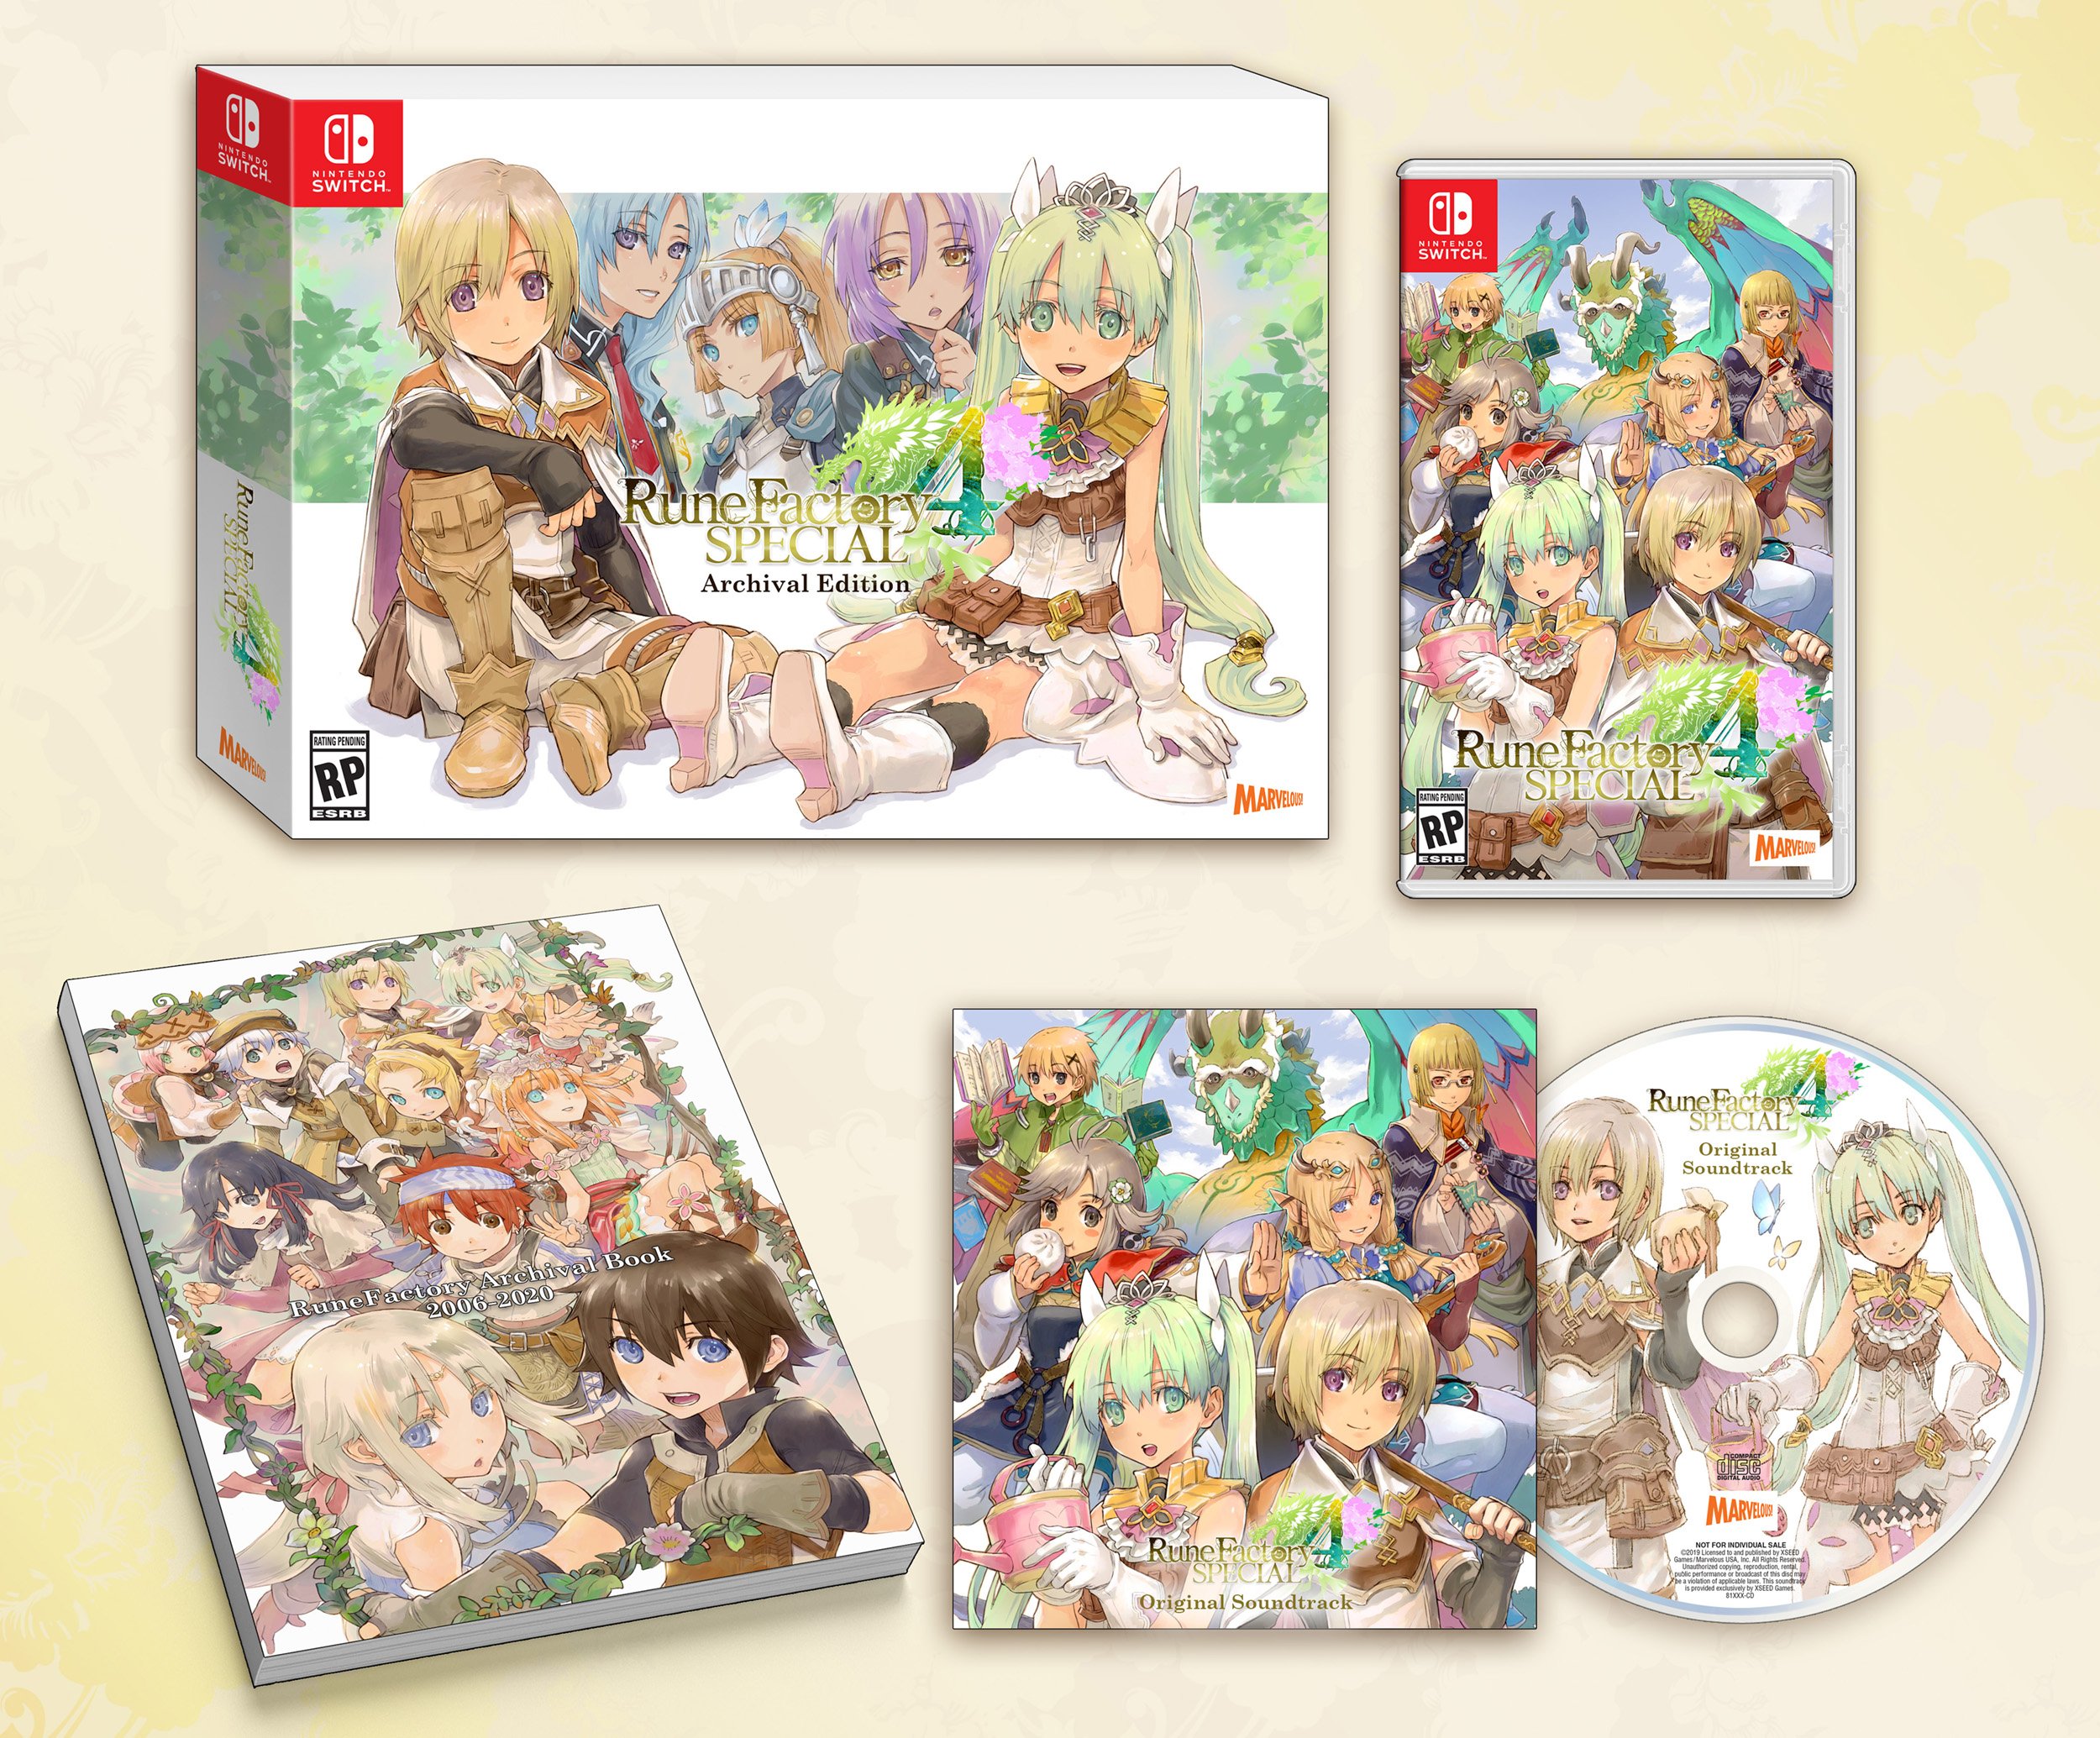 Rune-Factory-4-Special-Archival-Edition_09-09-19.jpg